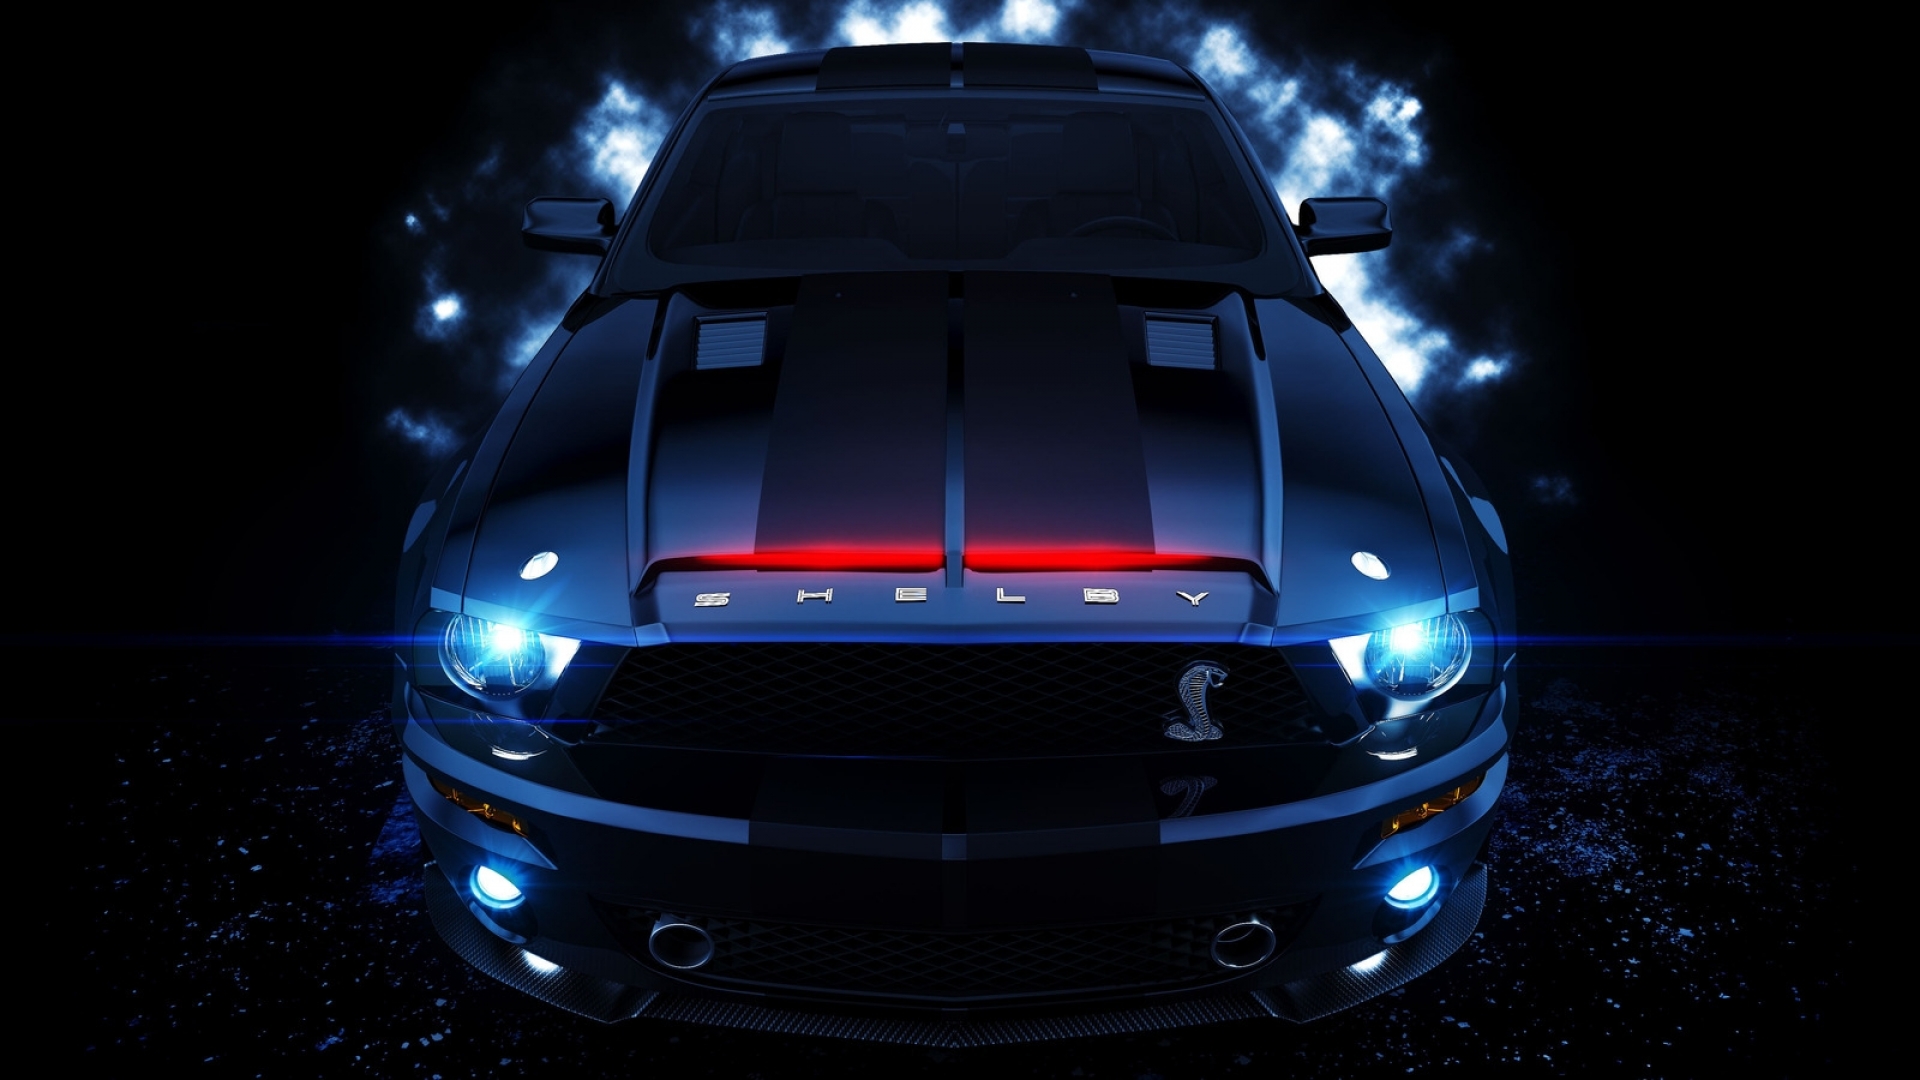 ford, Mustang, Shelby, Gt, Muscle, Cars Wallpaper